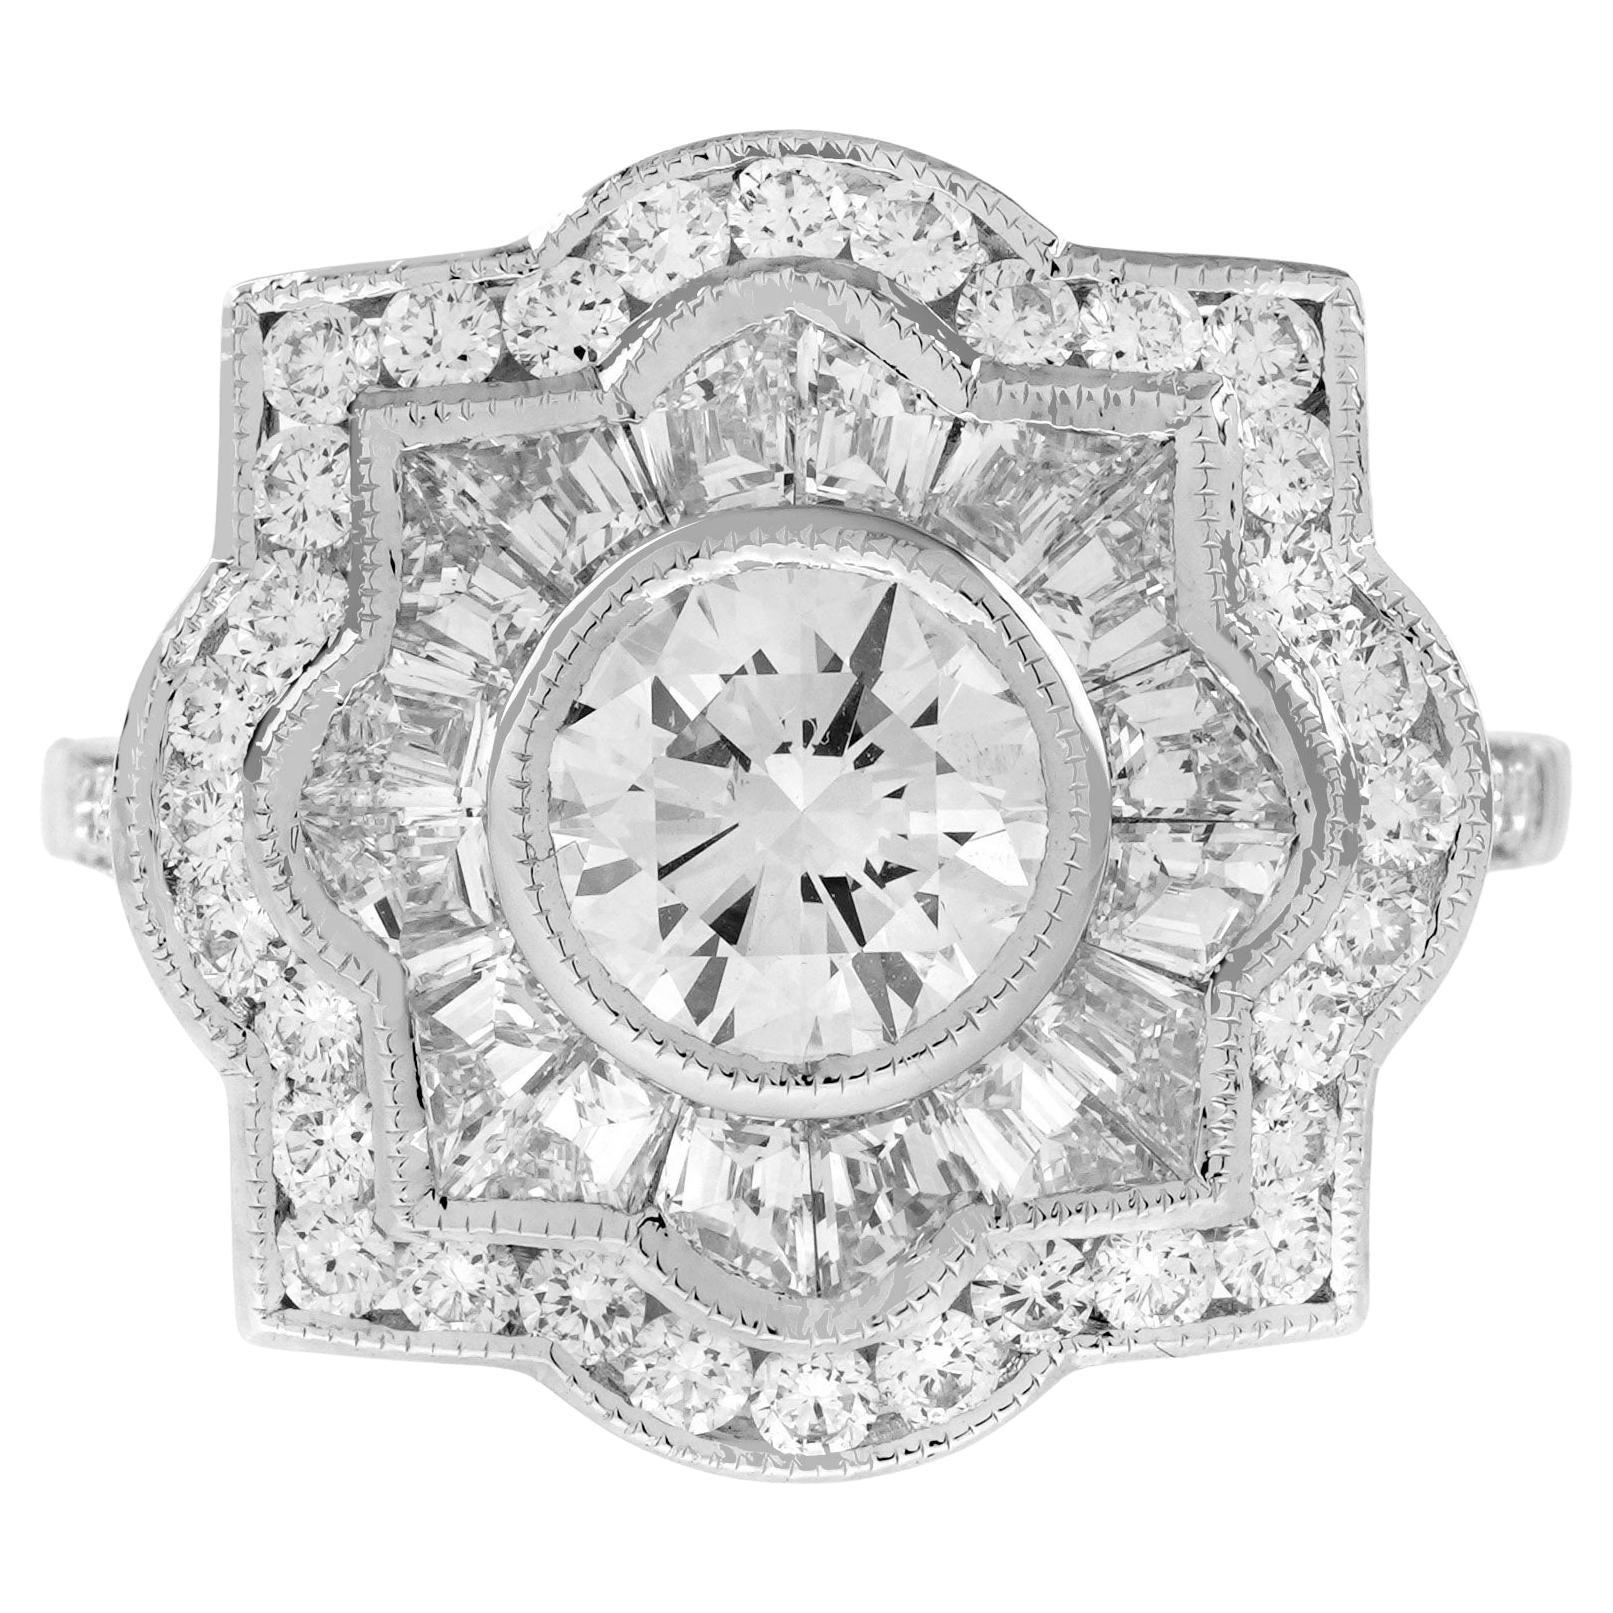 For Sale:  1.00 Ct. Diamond Art Deco Style Target Engagement Ring in 18K White Gold